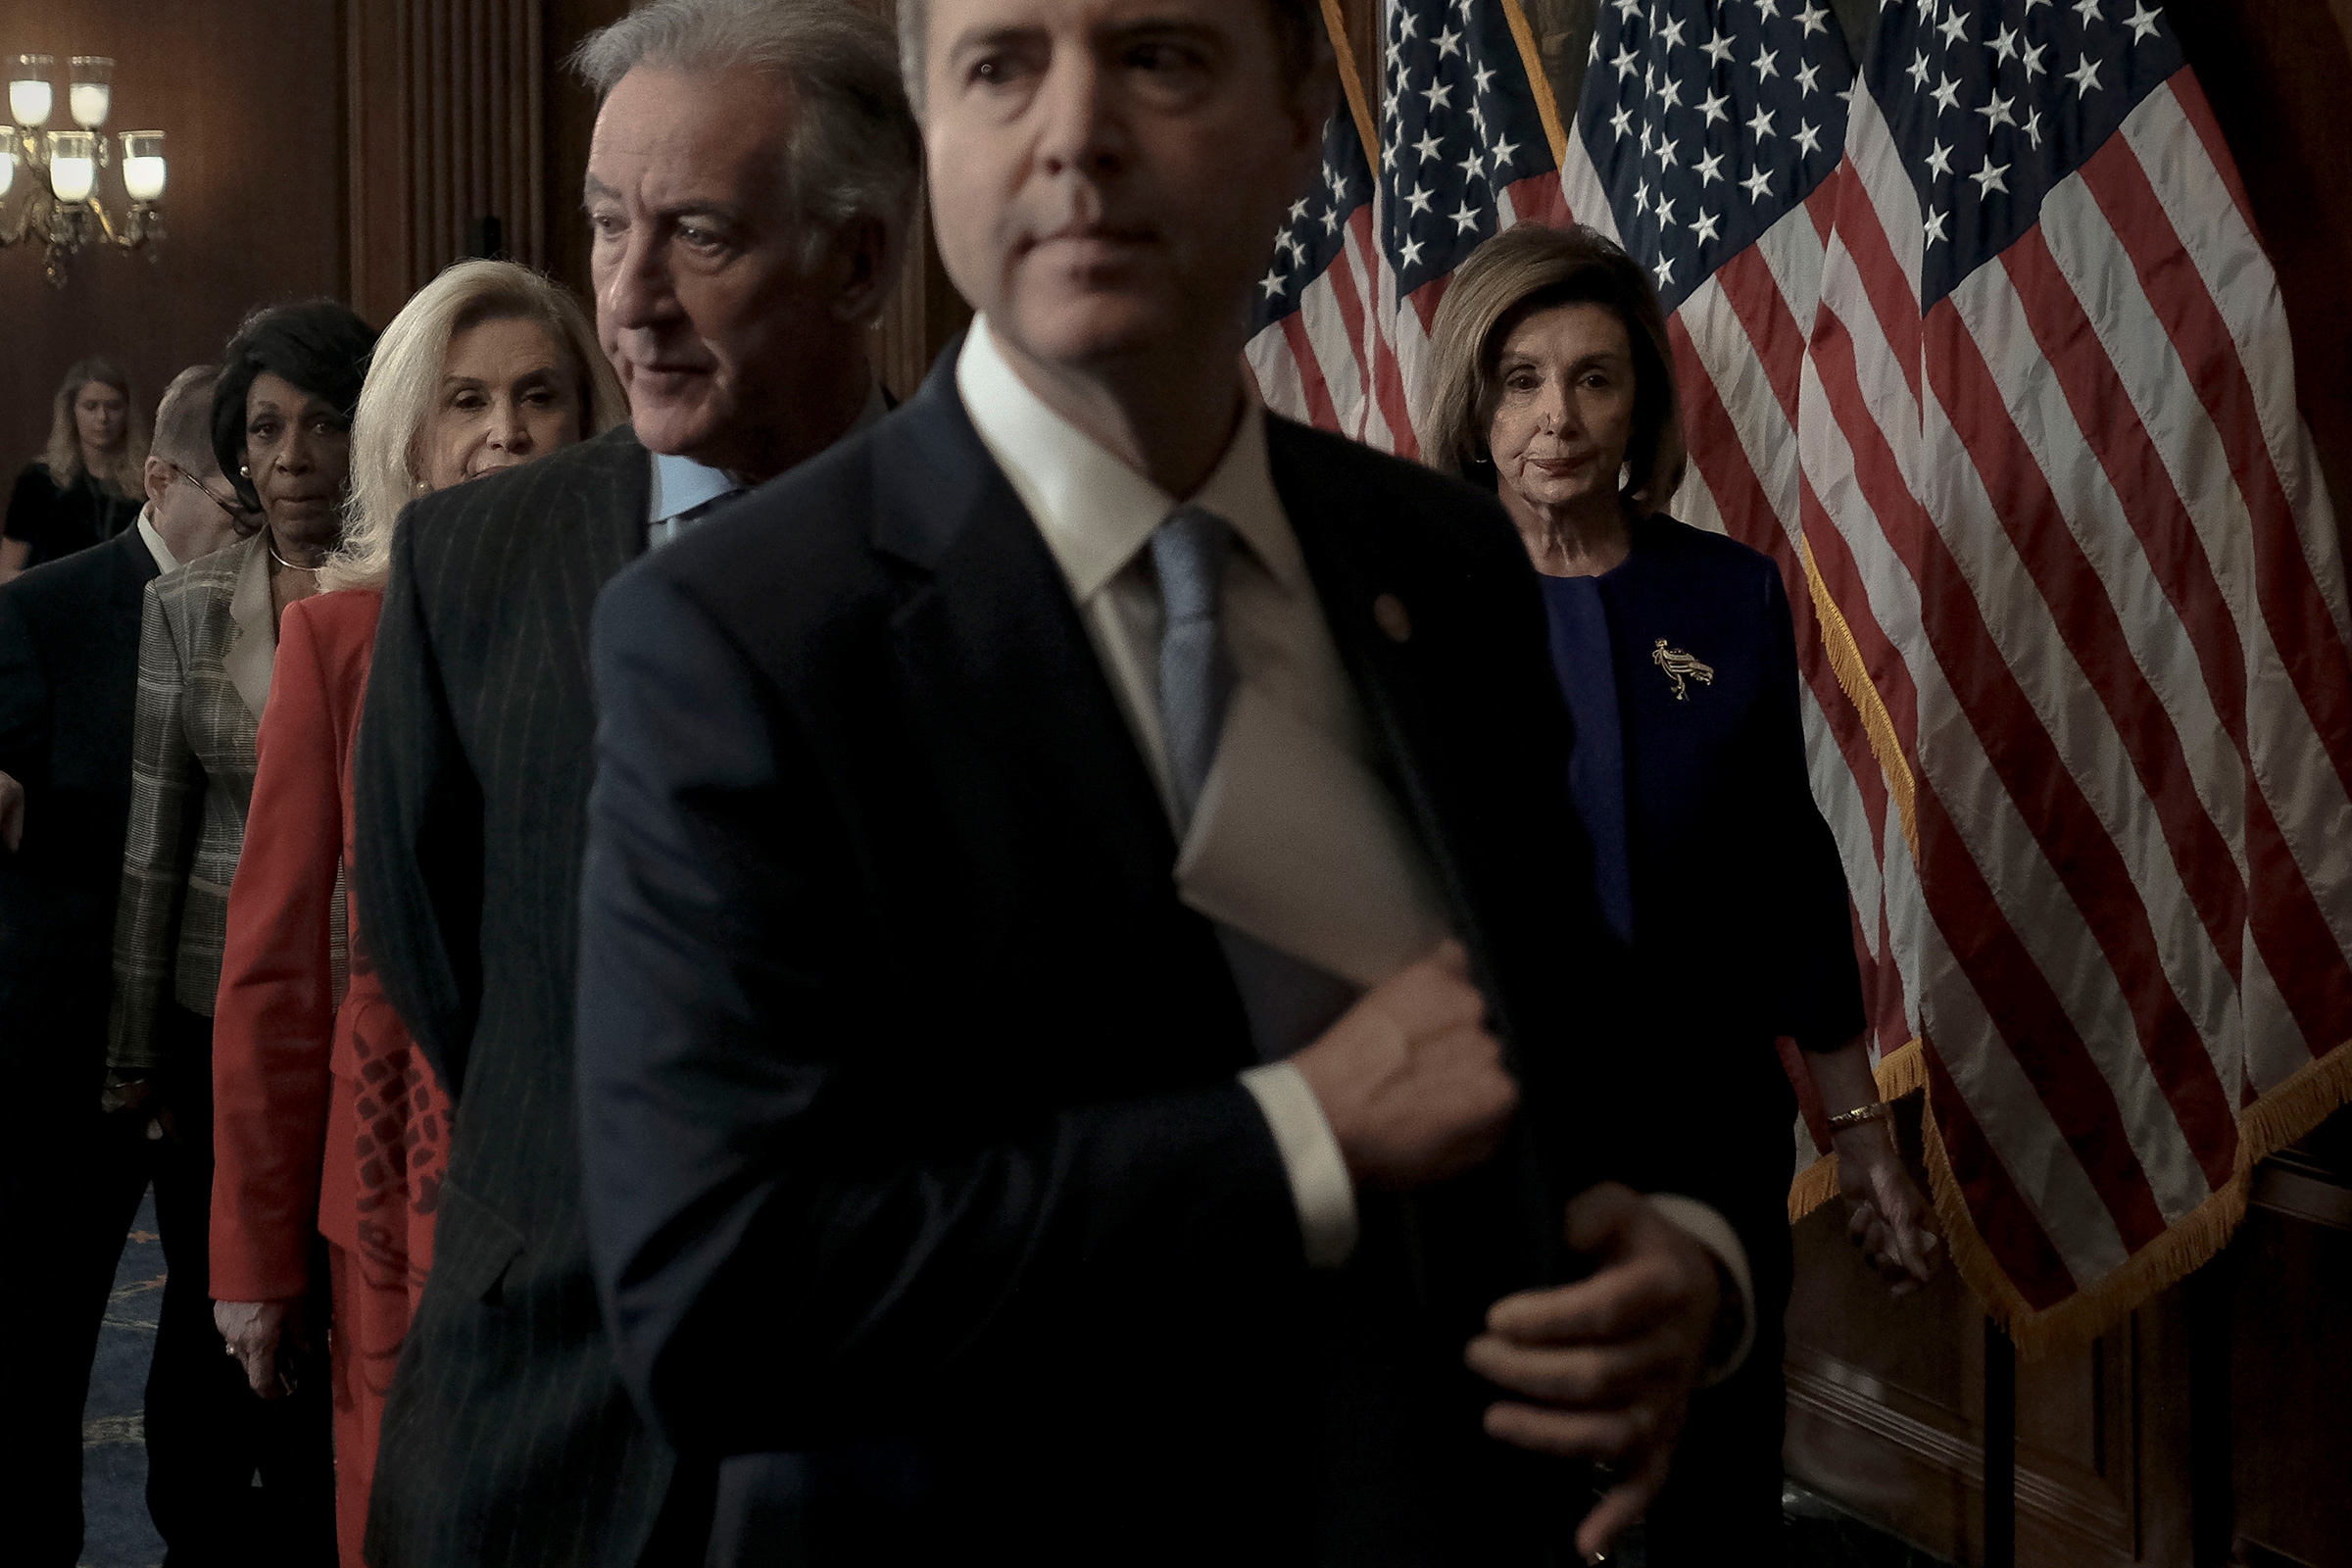 House Democrats unveiled articles of impeachment against President Trump on Dec. 10, charging him with committing two acts of high crimes and misdemeanors: abuse of power and obstruction of Congress. (Gabriella Demczuk for TIME)